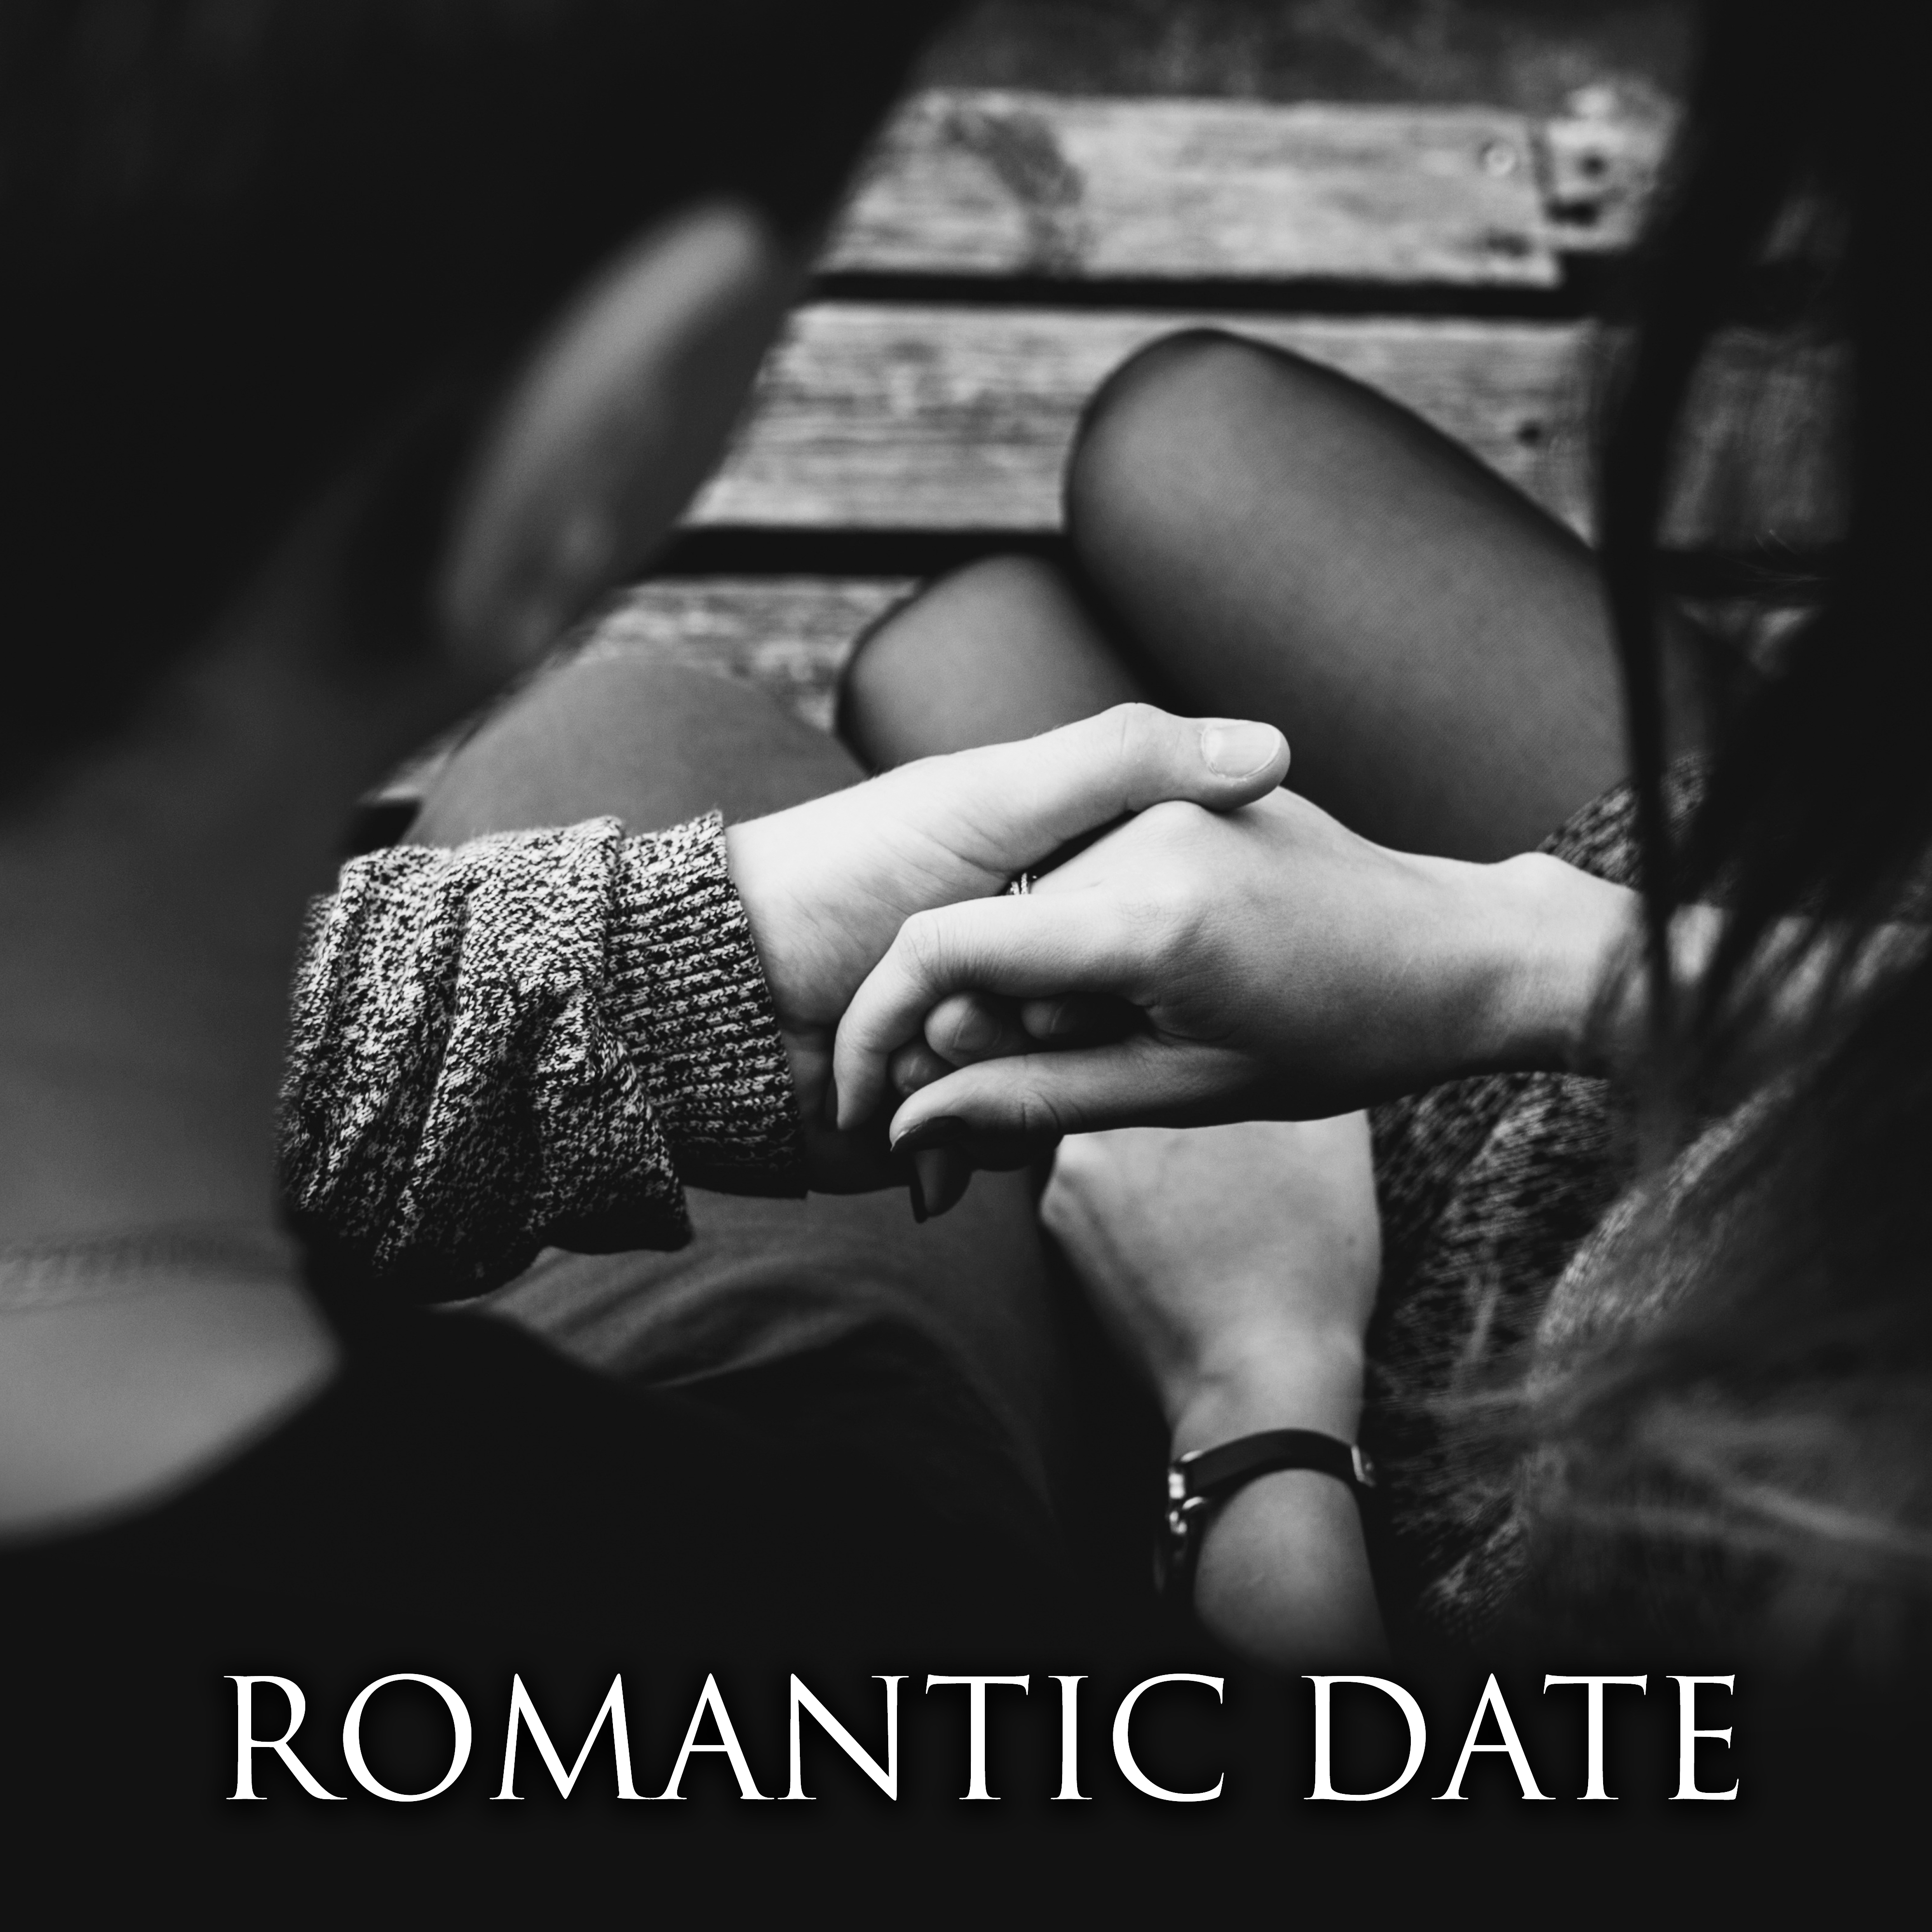 Romantic Date – Sensual New Age Music, Pure Relaxation for Two, Erotic Lounge, Dinner by Candlelight, **** Vibes